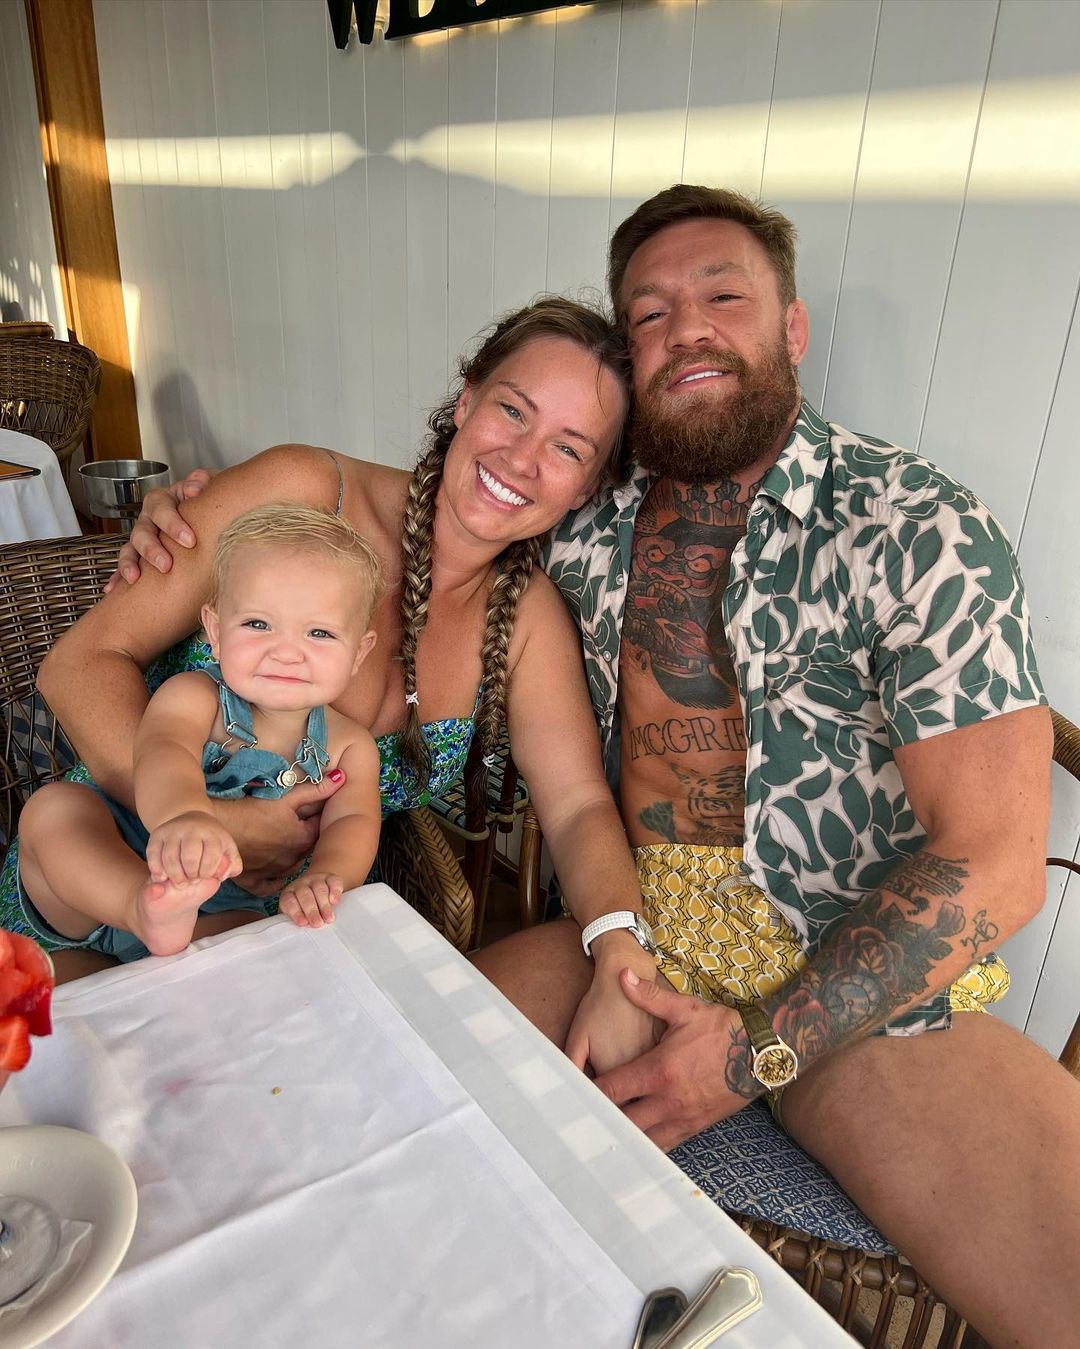 Conor McGregor's Growing Family: How Many Children Does He Have?